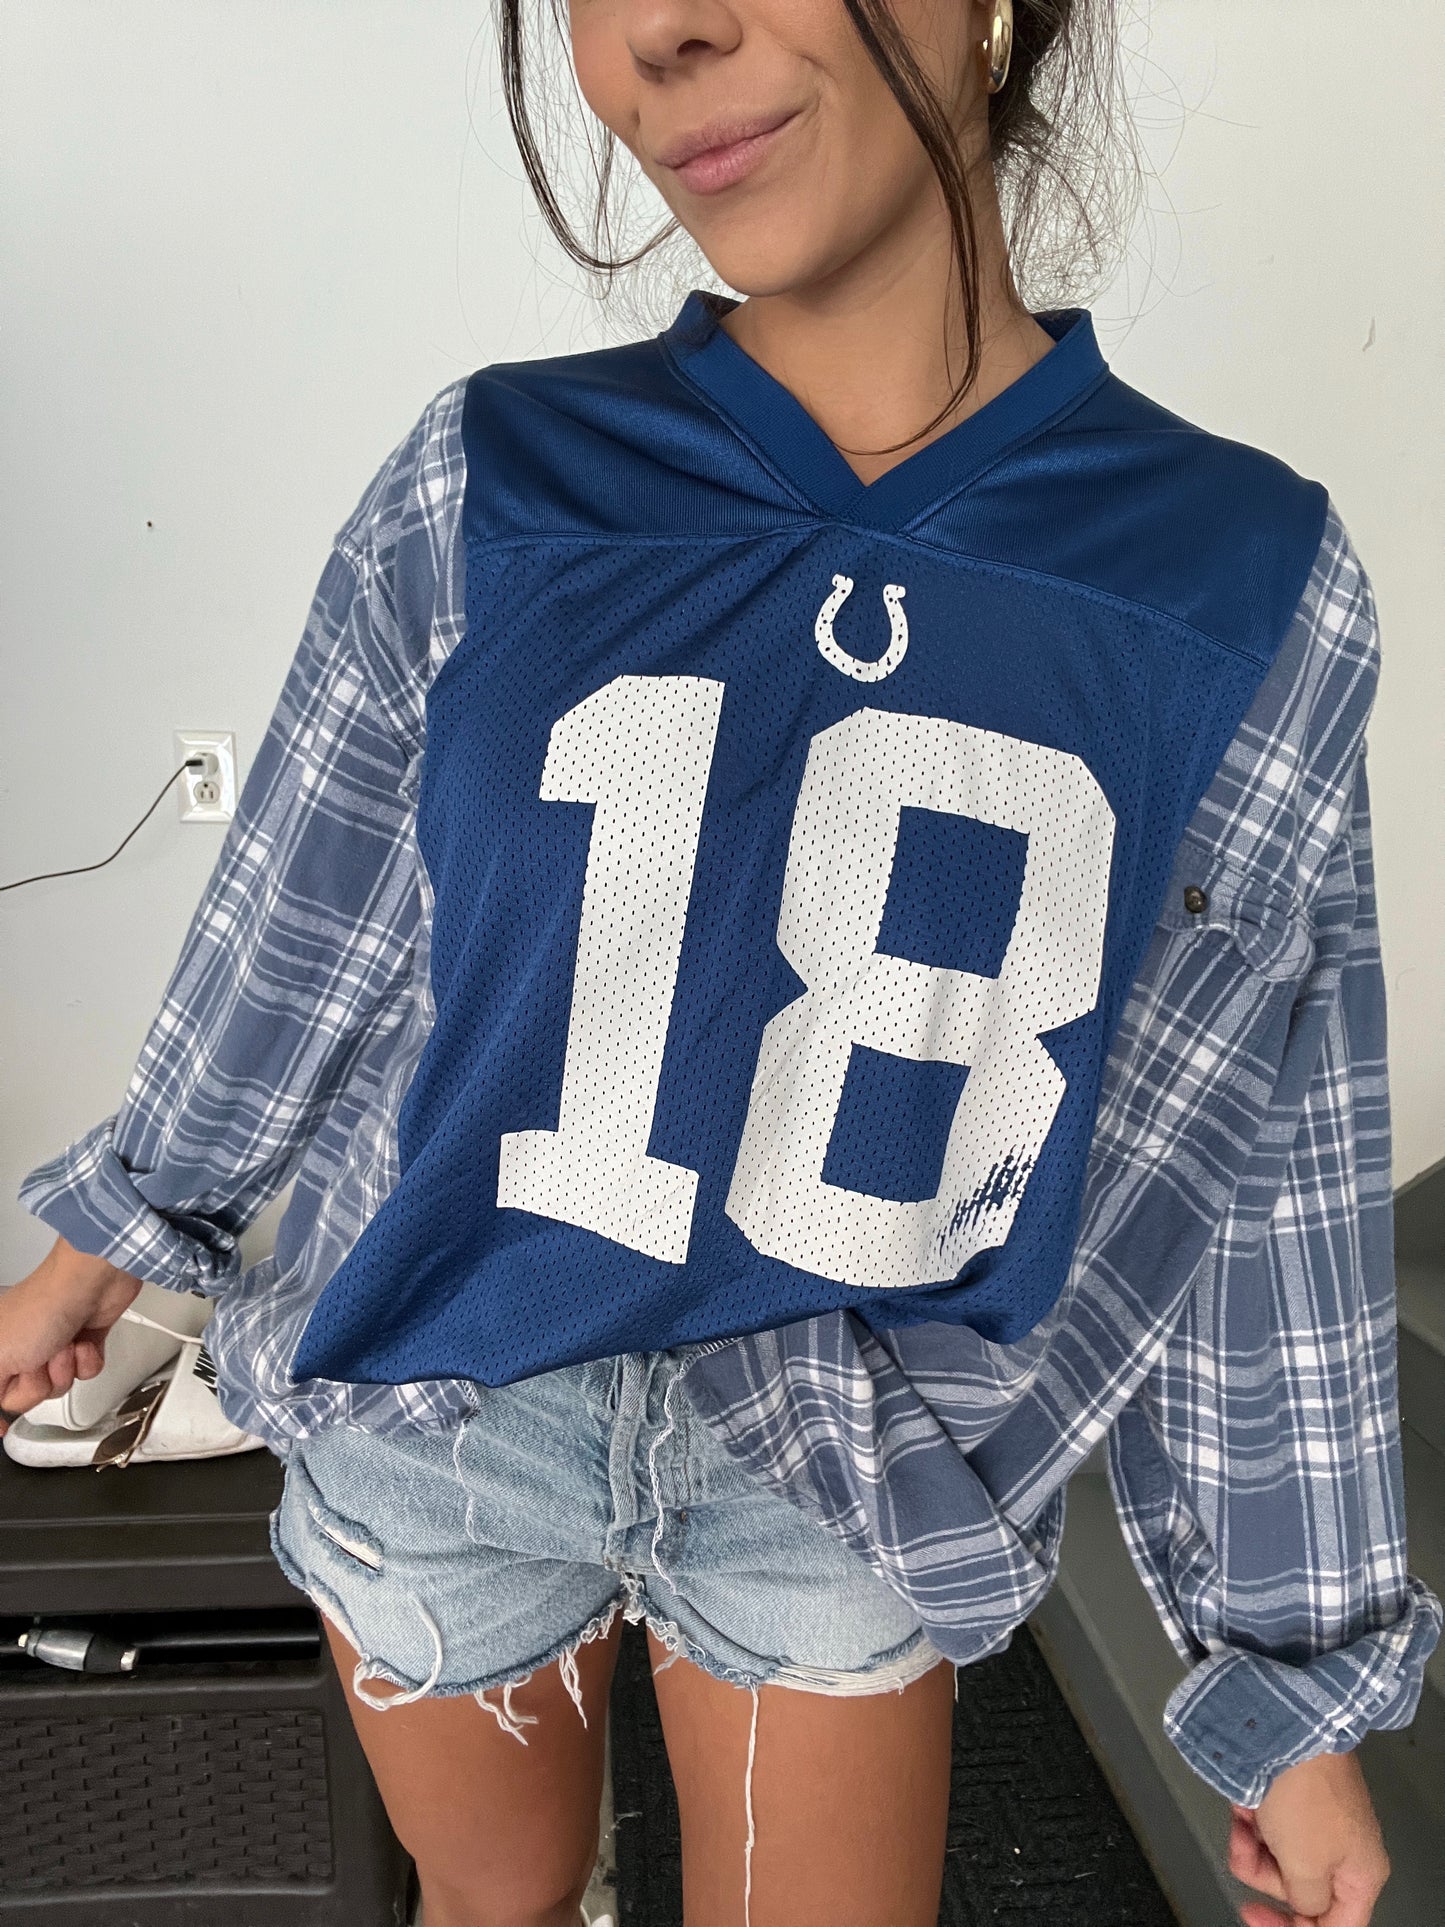 #18 MANNING COLTS JERSEY X FLANNEL